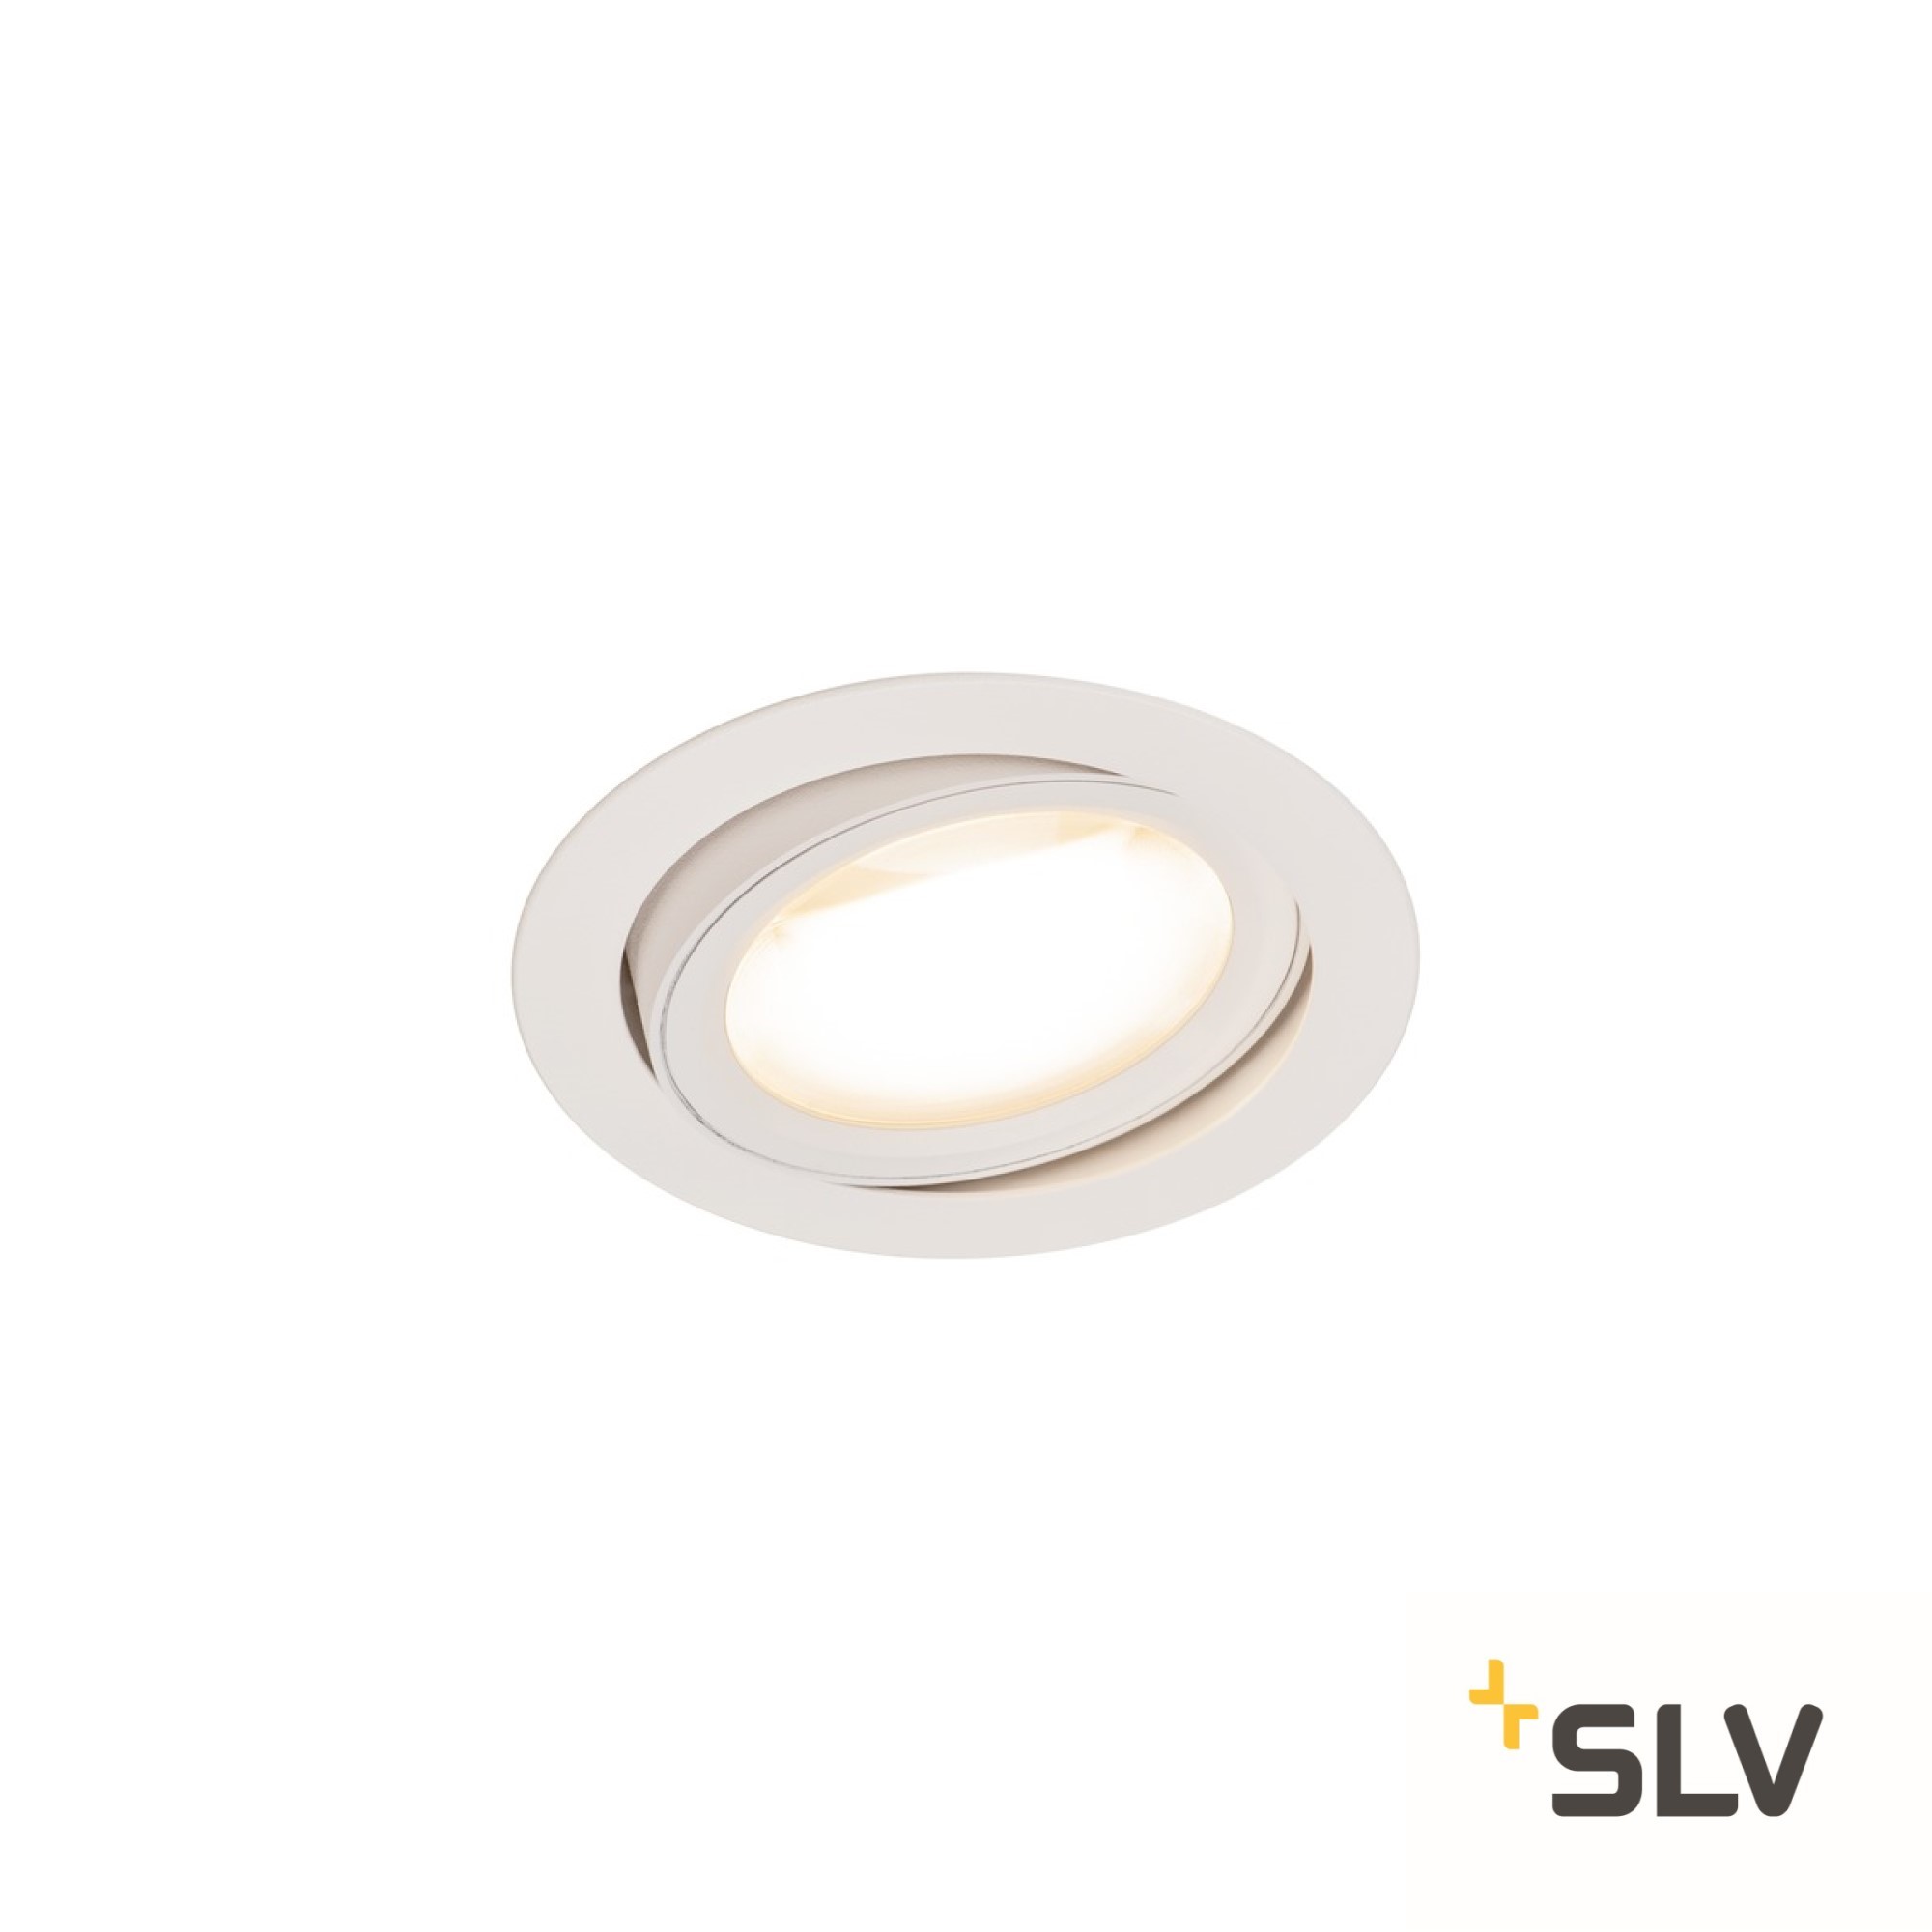 SLV OCULUS MOVE LED Downlight 2000/3000K Dim2Warm white TRIAC-dimmable 780lm